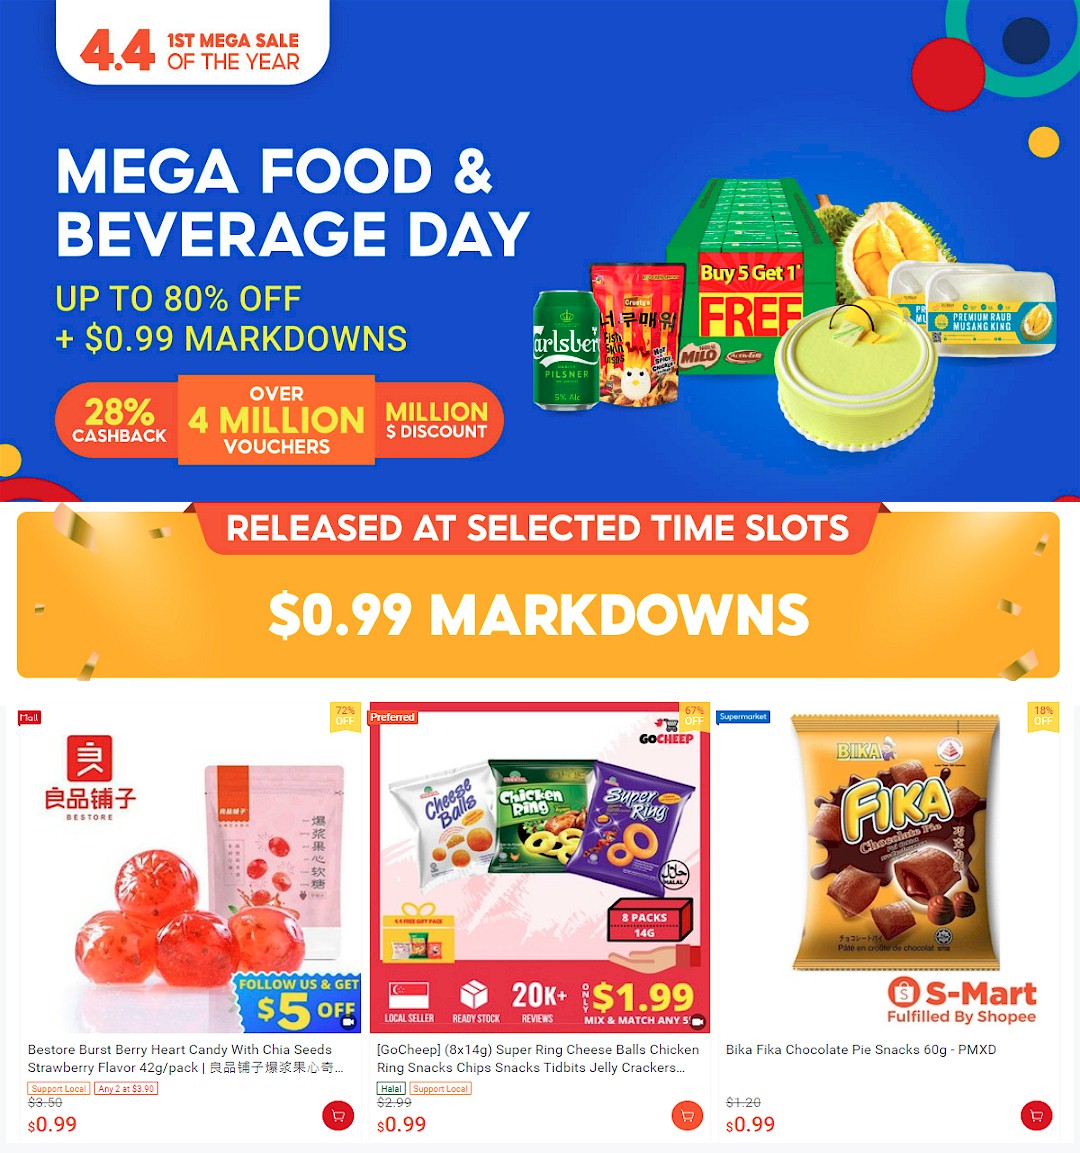 All Singapore Deals Mega Food & Beverage Promotion With Discounts Of